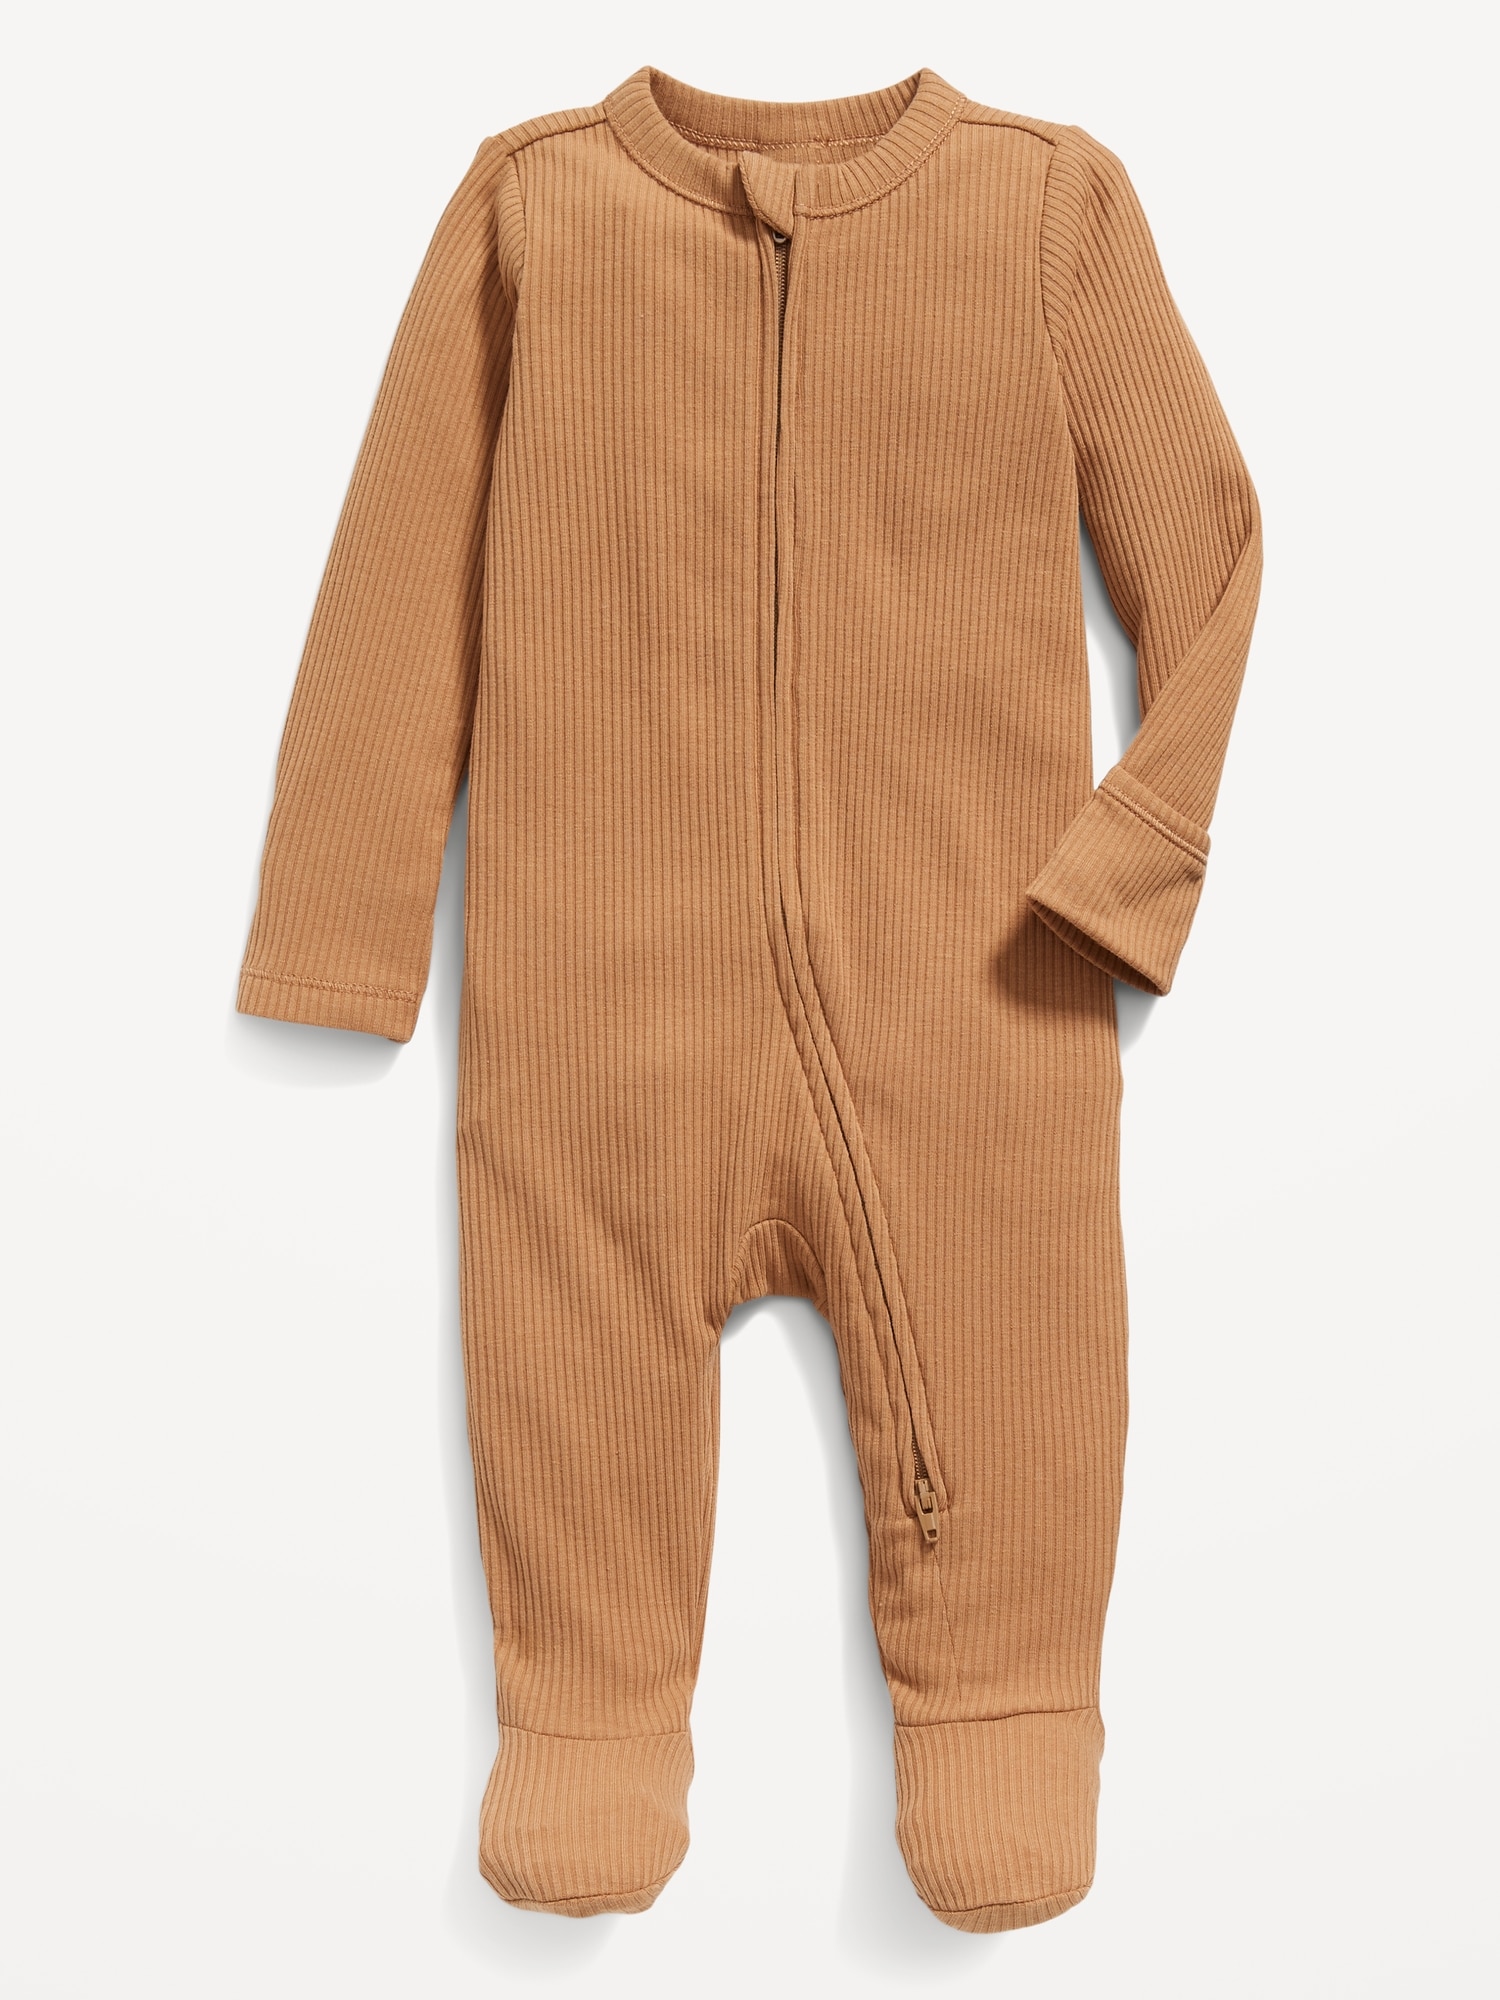 Oldnavy Unisex 2-Way-Zip Sleep & Play Footed One-Piece for Baby Hot Deal